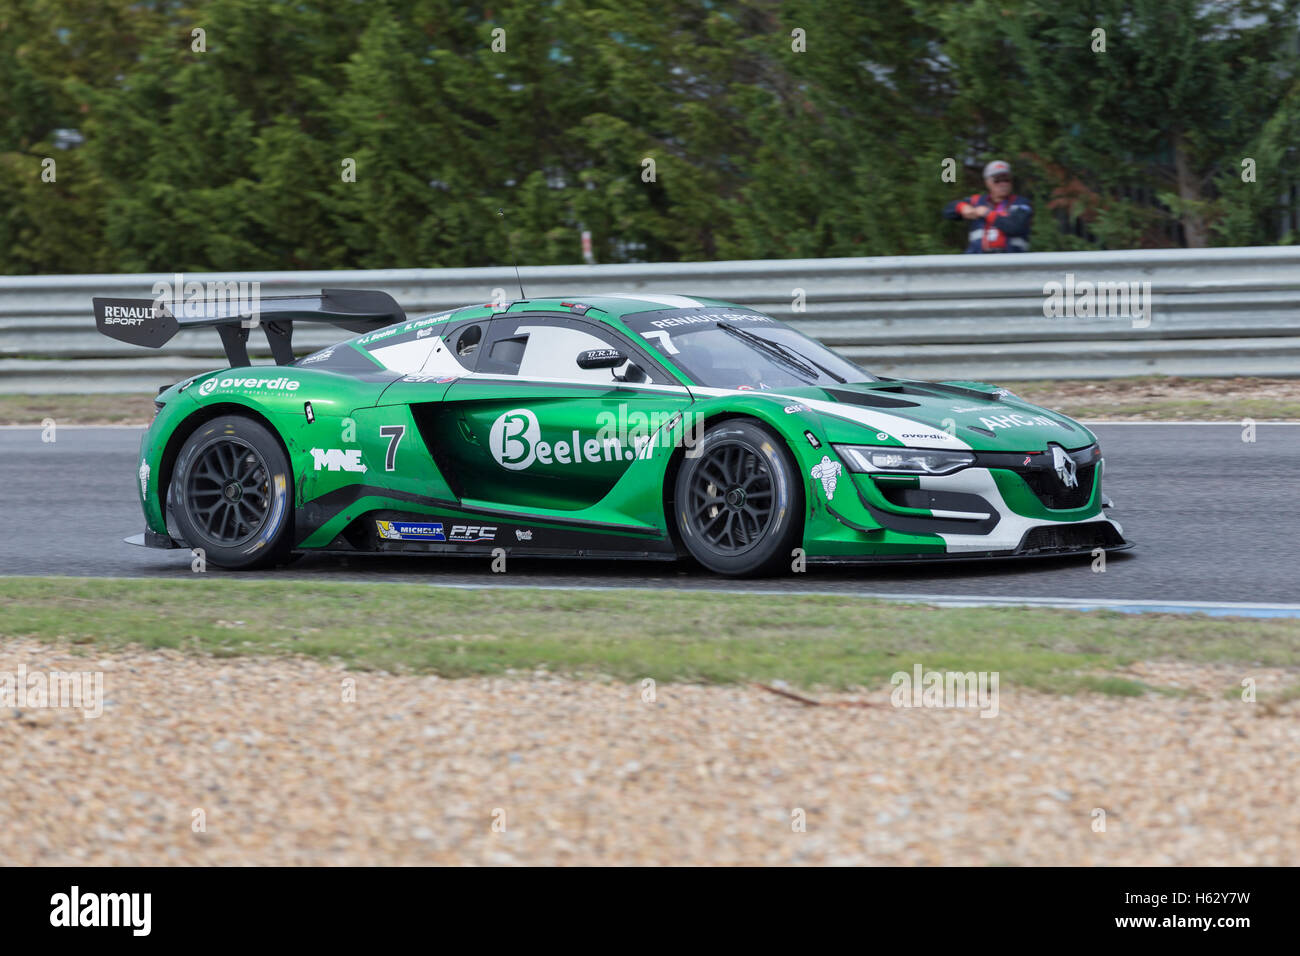 October 23, 2016. Estoril, Portugal. The #7 V8 Racing (NED), driven by Nicky Pastorelli (NED) and Jelle Beelen (NED) during the Race of Renault Sport Trophy, during the European Le Mans Series Week-End Estoril Credit:  Alexandre de Sousa/Alamy Live News Stock Photo